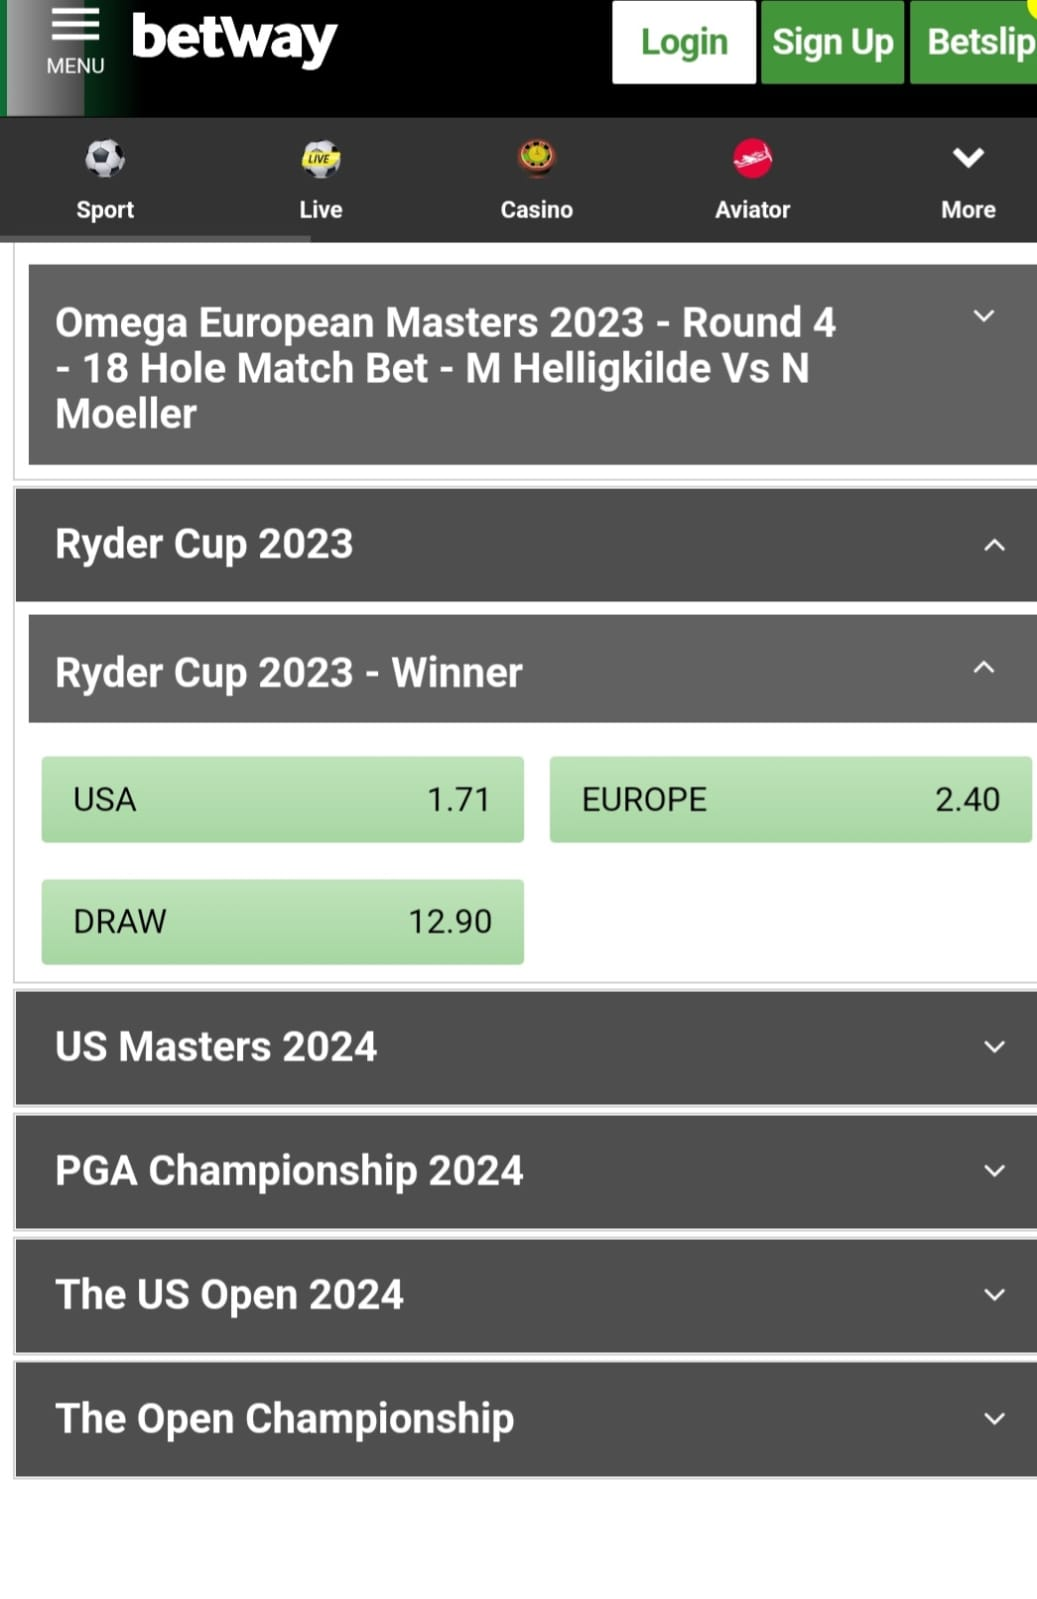 Ryder Cup, USA draw